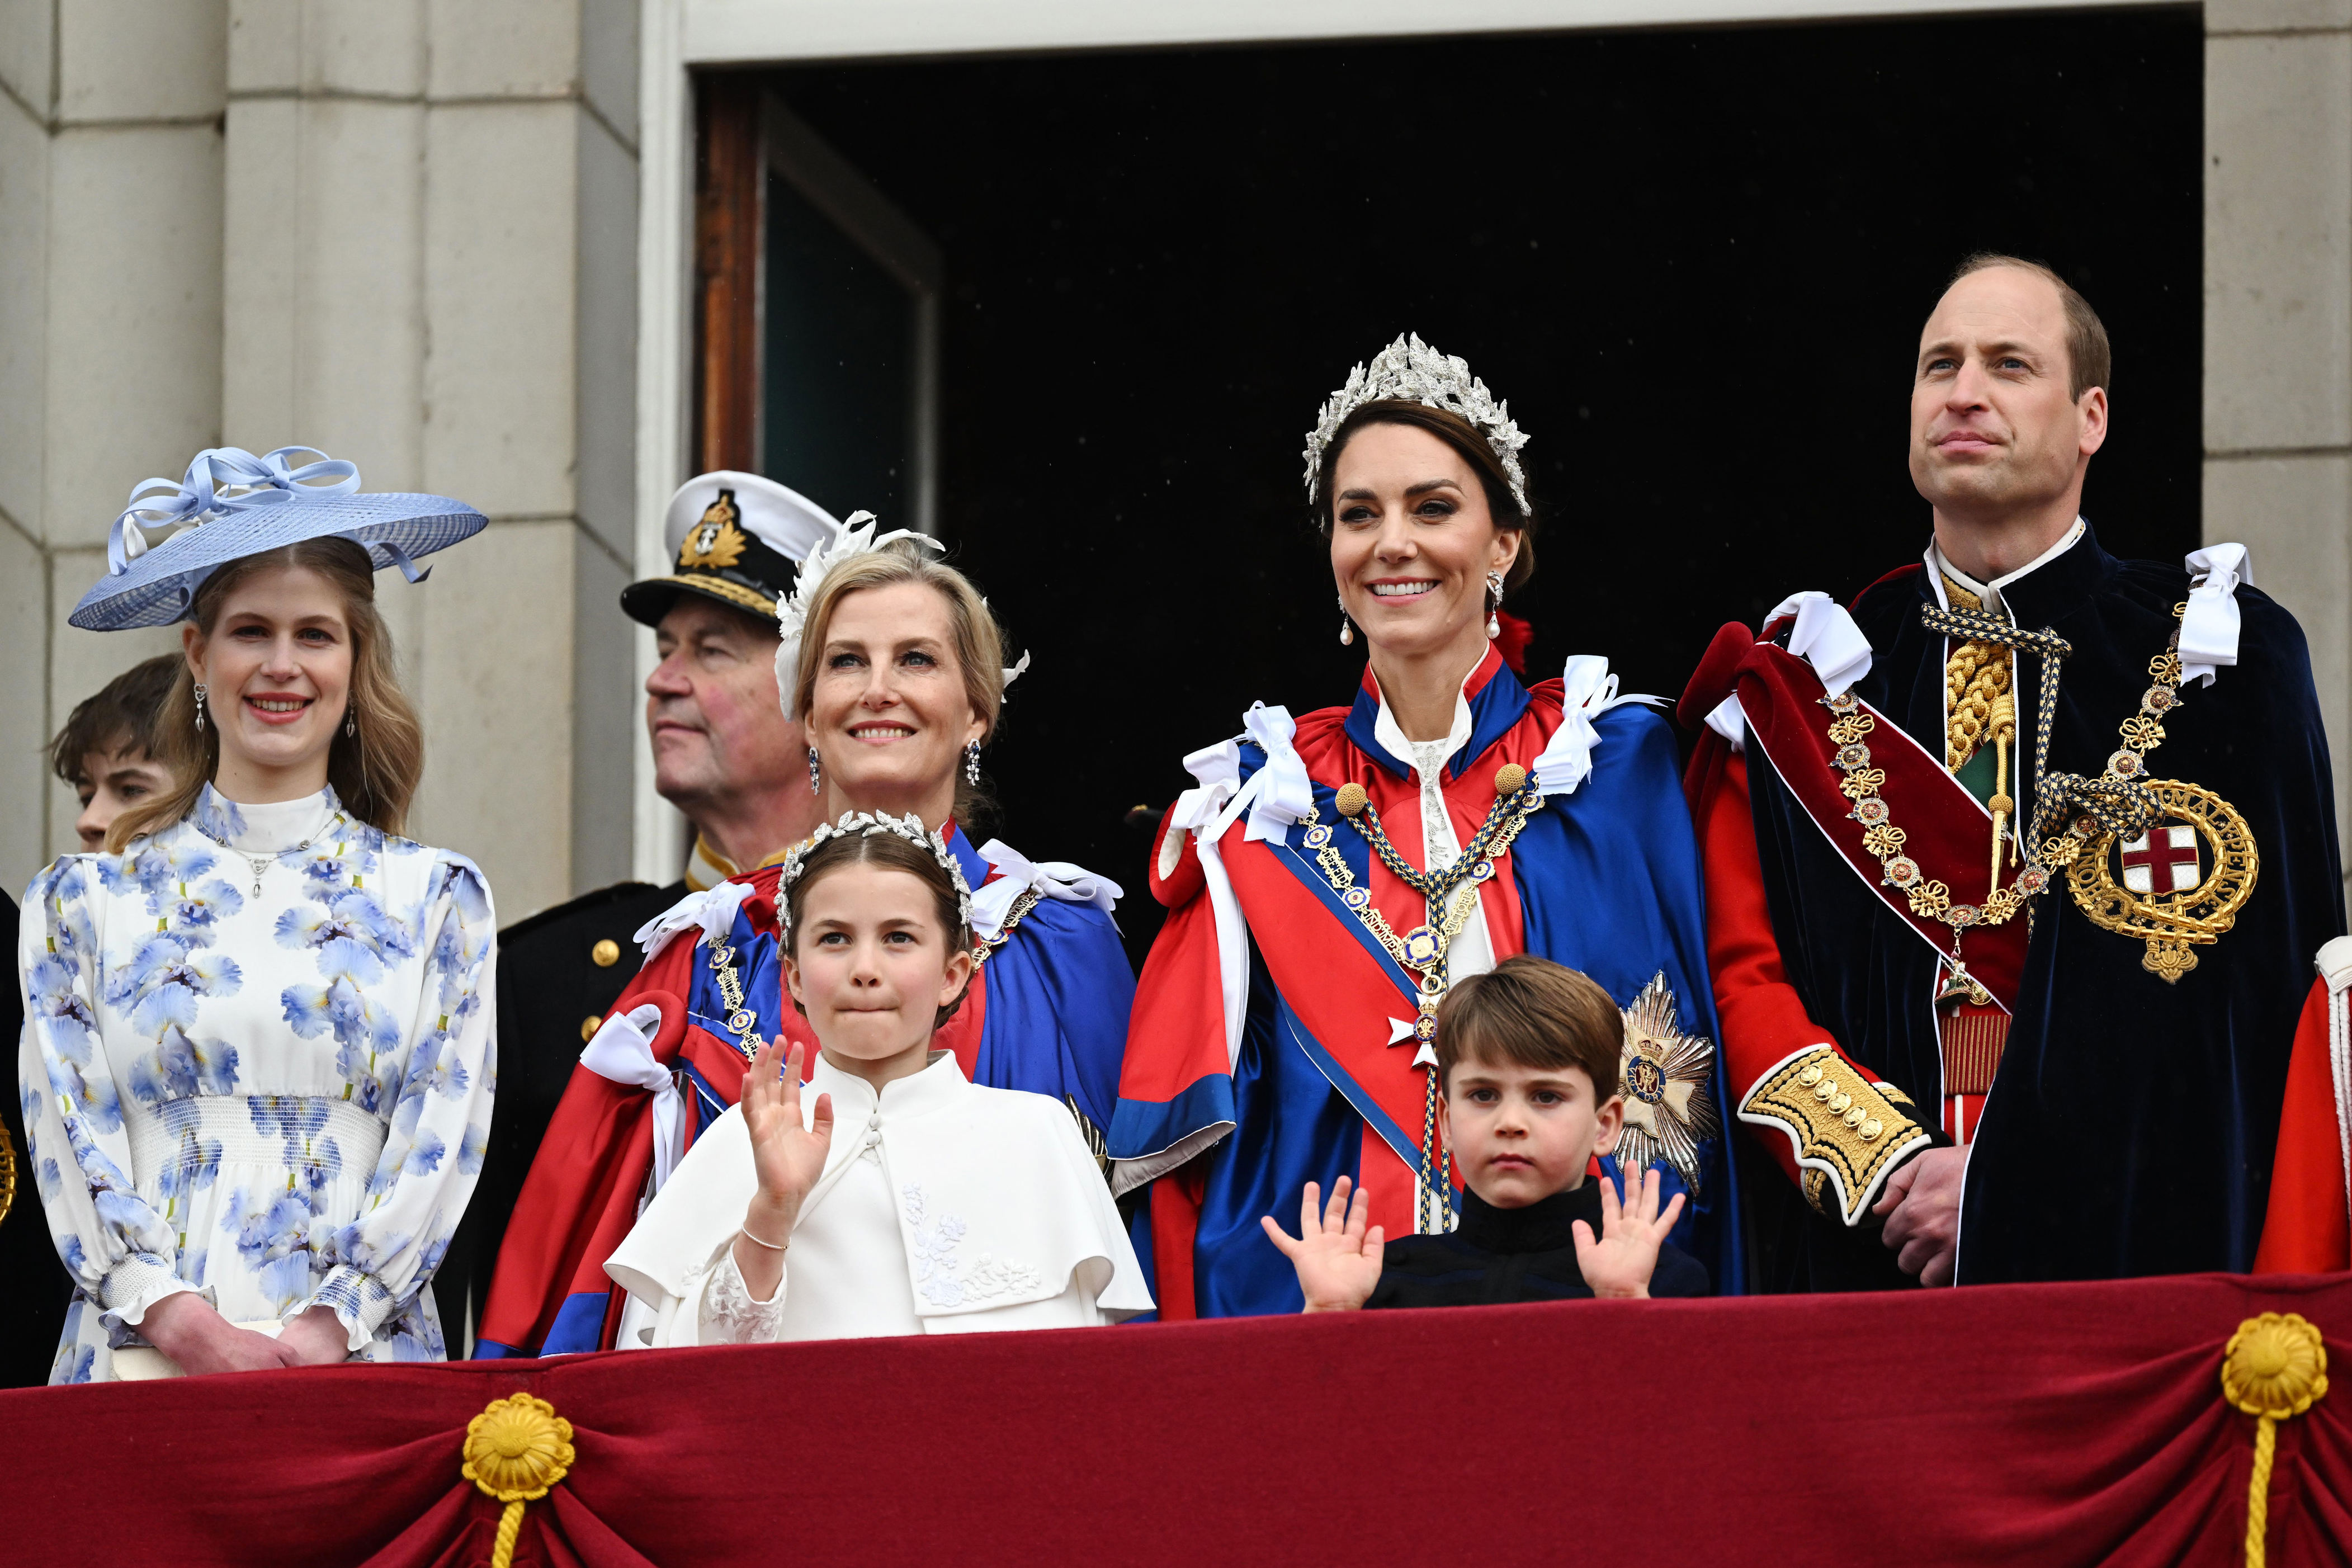 <p>Princess Charlotte waved while little brother Prince Louis raised the roof alongside their parents, Princess Kate and Prince William, on the balcony of Buckingham Palace in London following <a href="https://www.wonderwall.com/celebrity/the-coronation-of-king-charles-iii-and-queen-camilla-the-best-pictures-of-all-the-royals-at-this-historic-event-735015.gallery">the coronation</a> of King Charles III on May 6, 2023.</p>